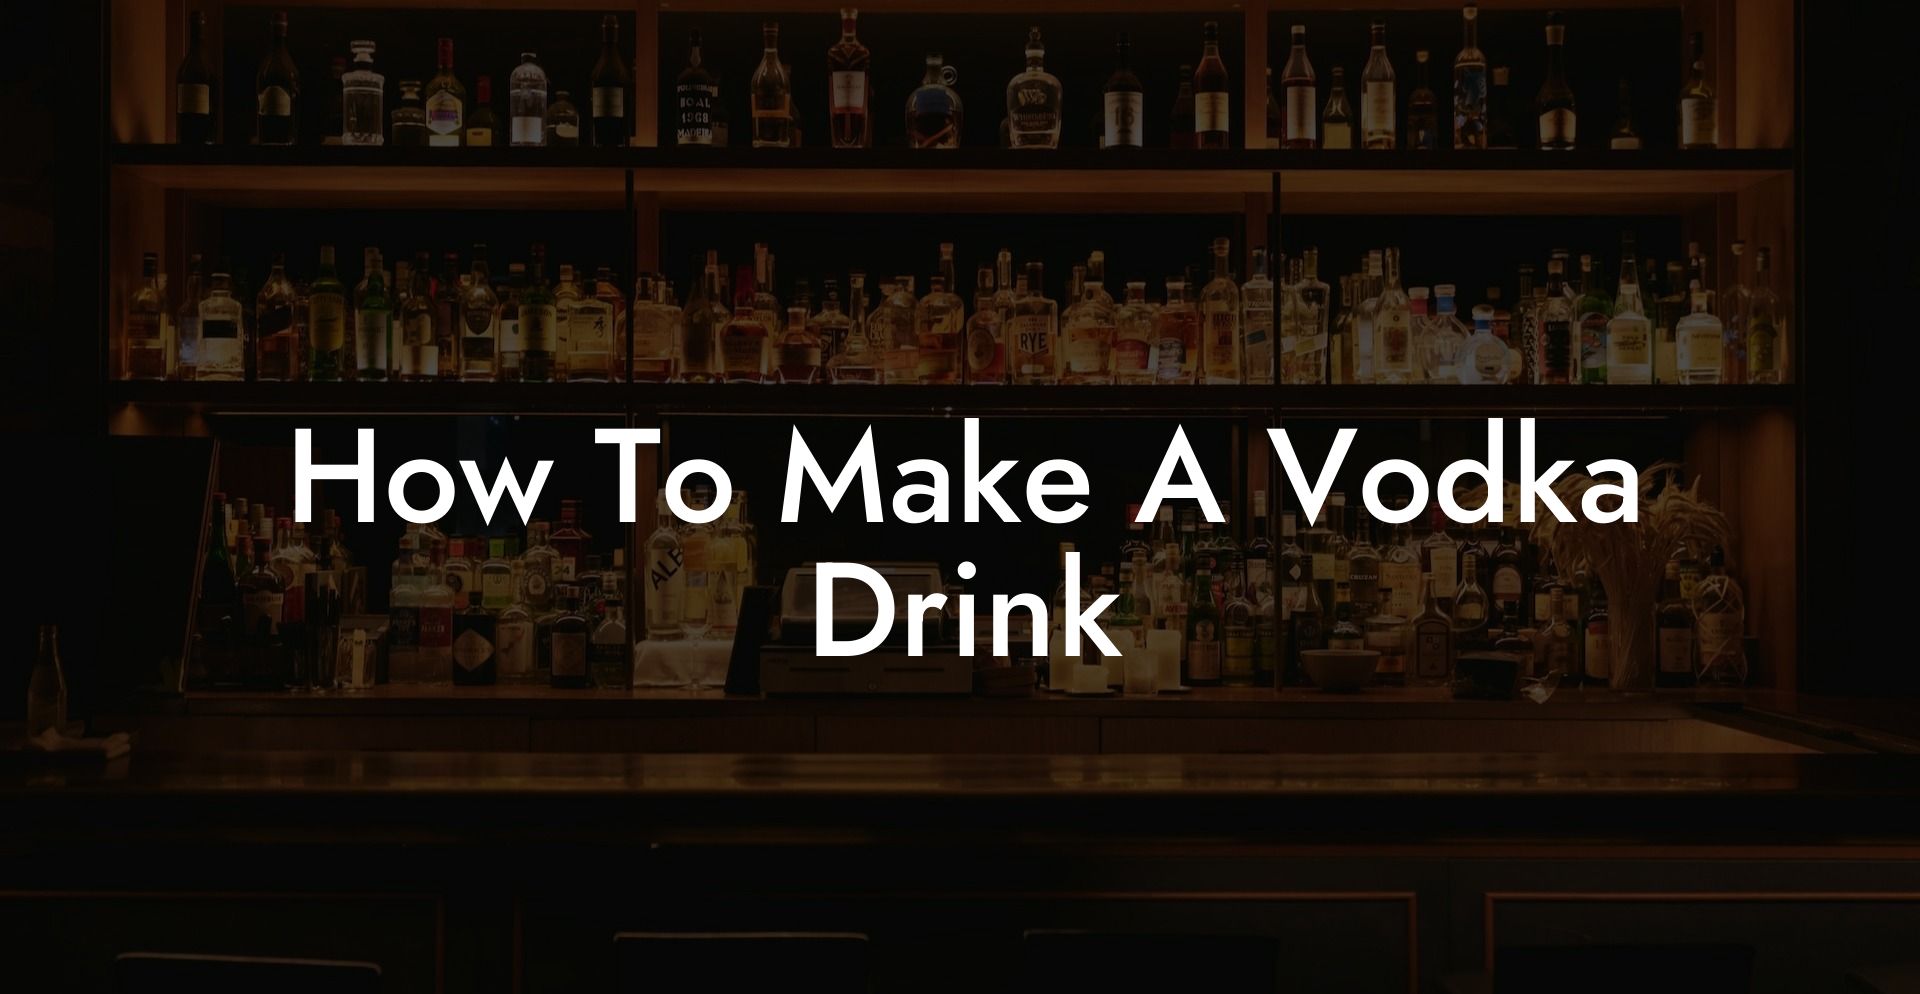 How To Make A Vodka Drink